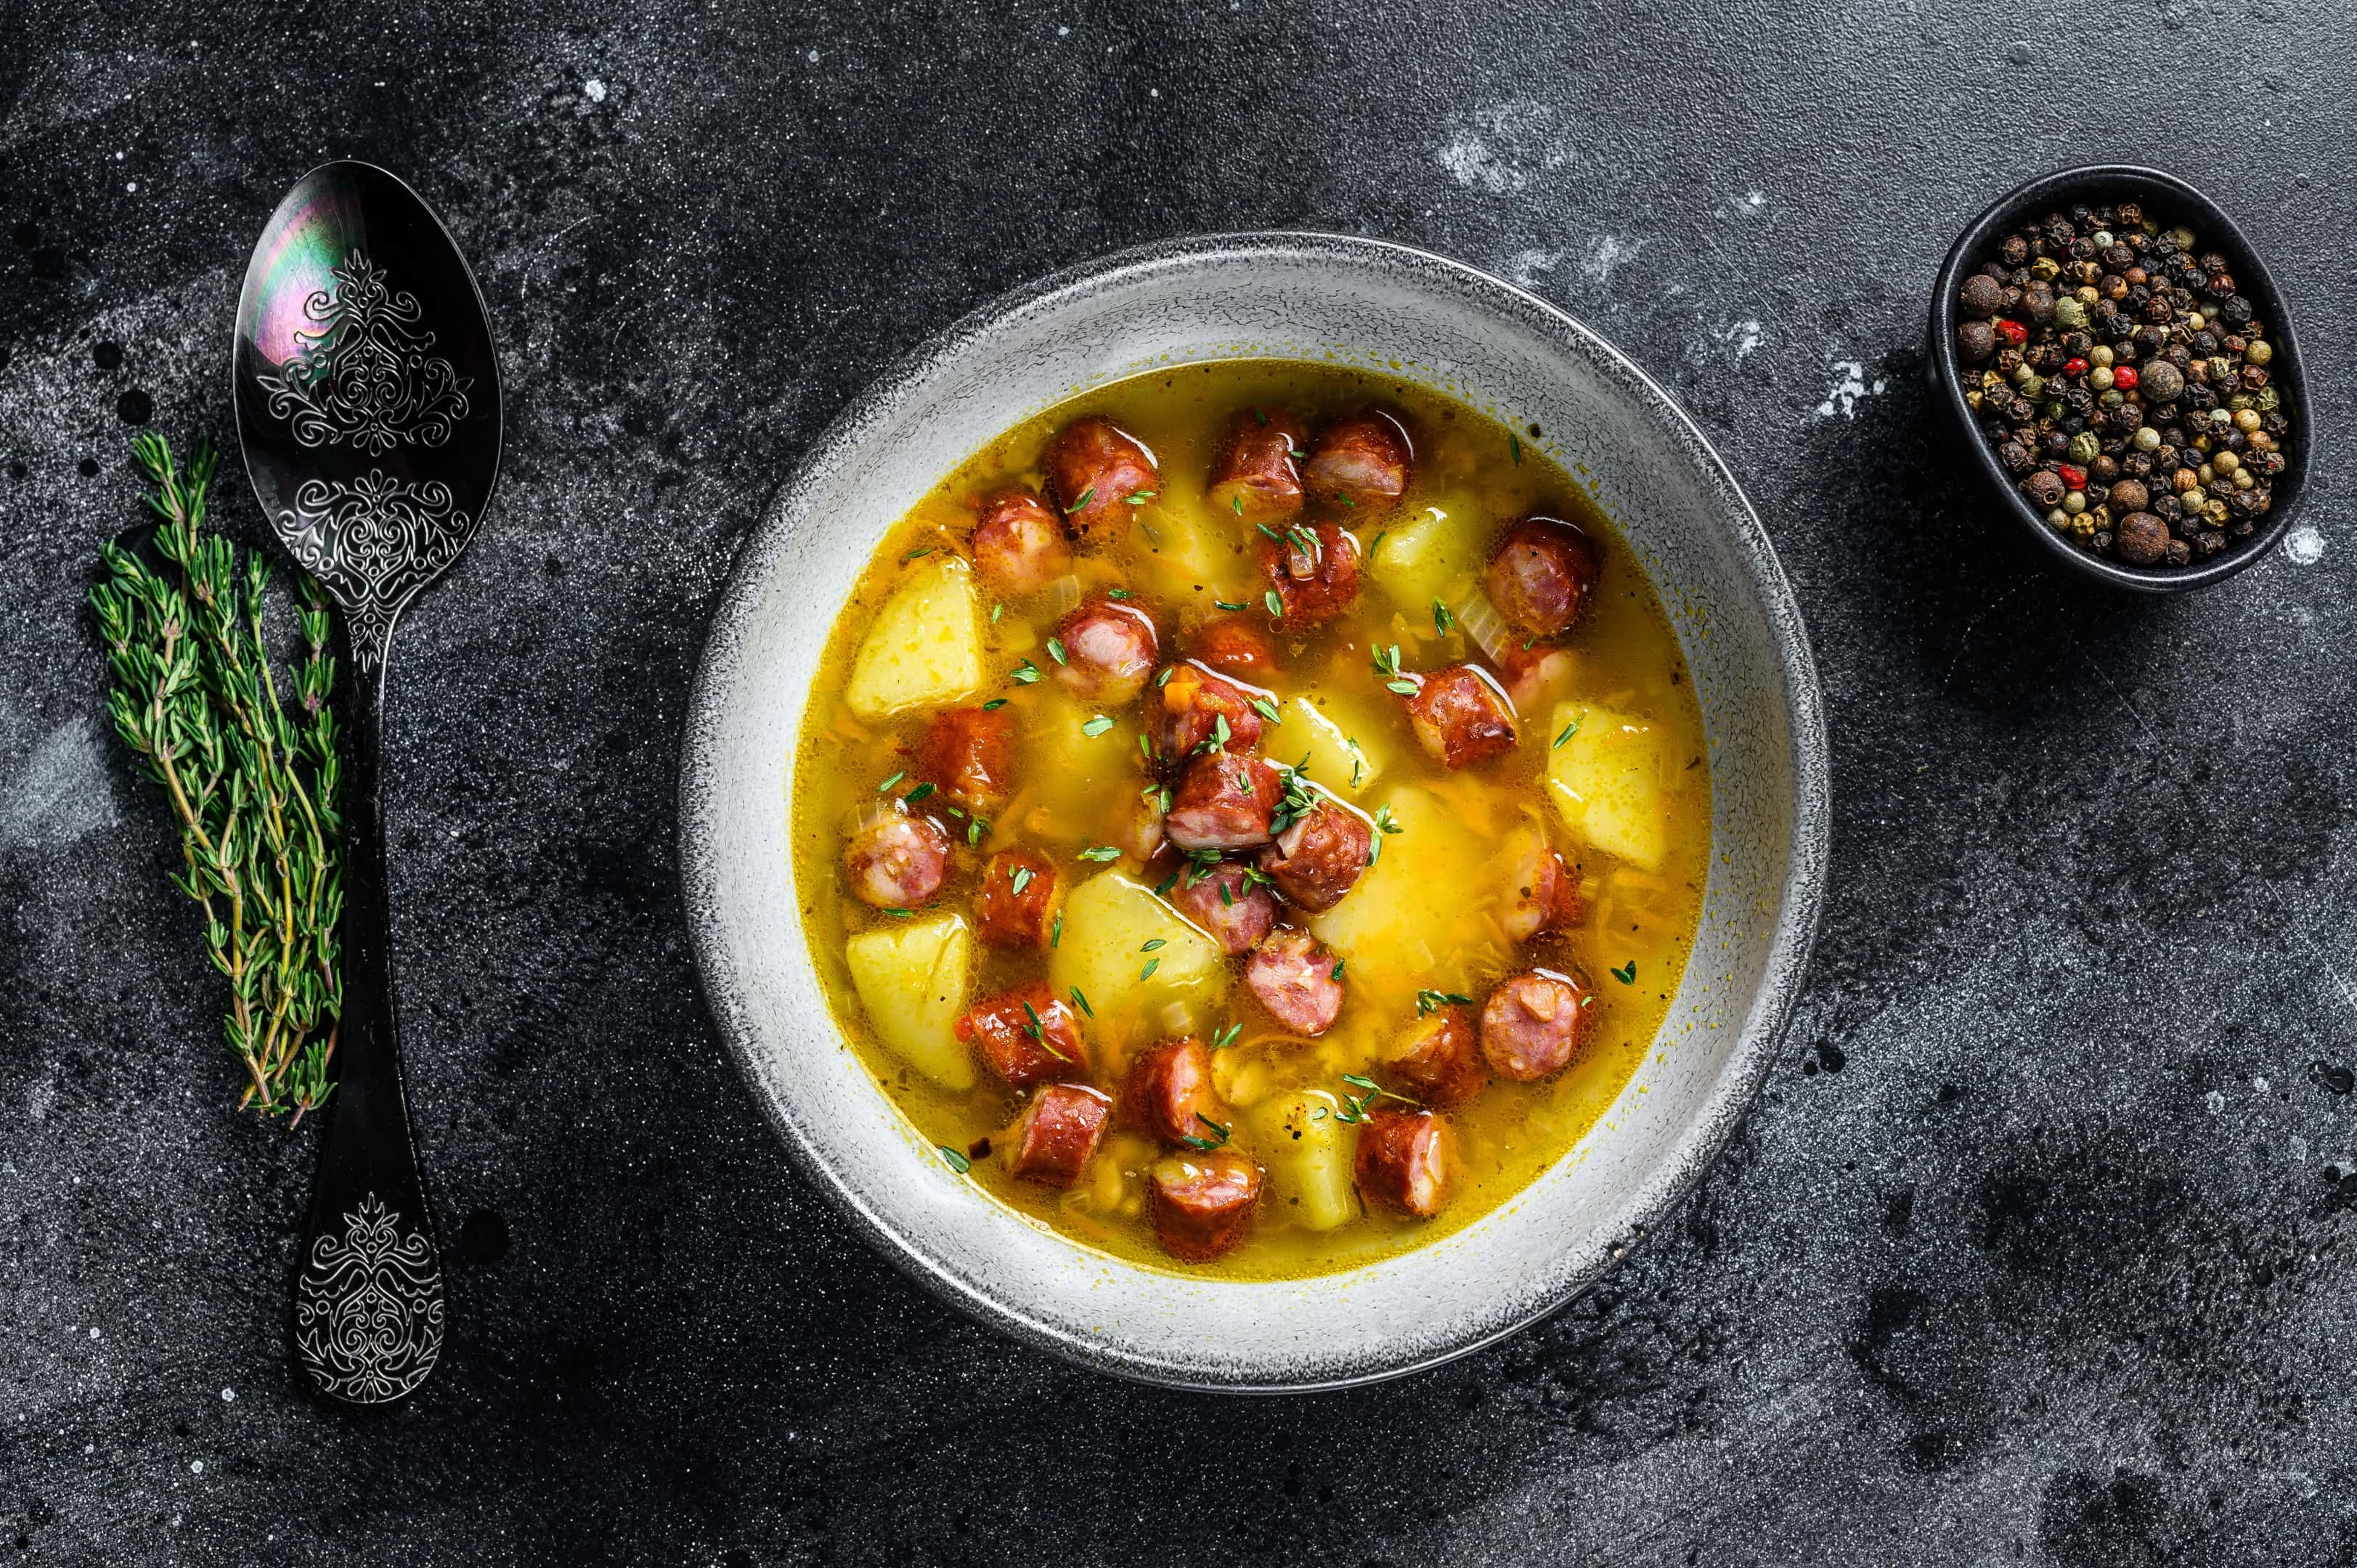 German yellow split pea soup with smoked sausages